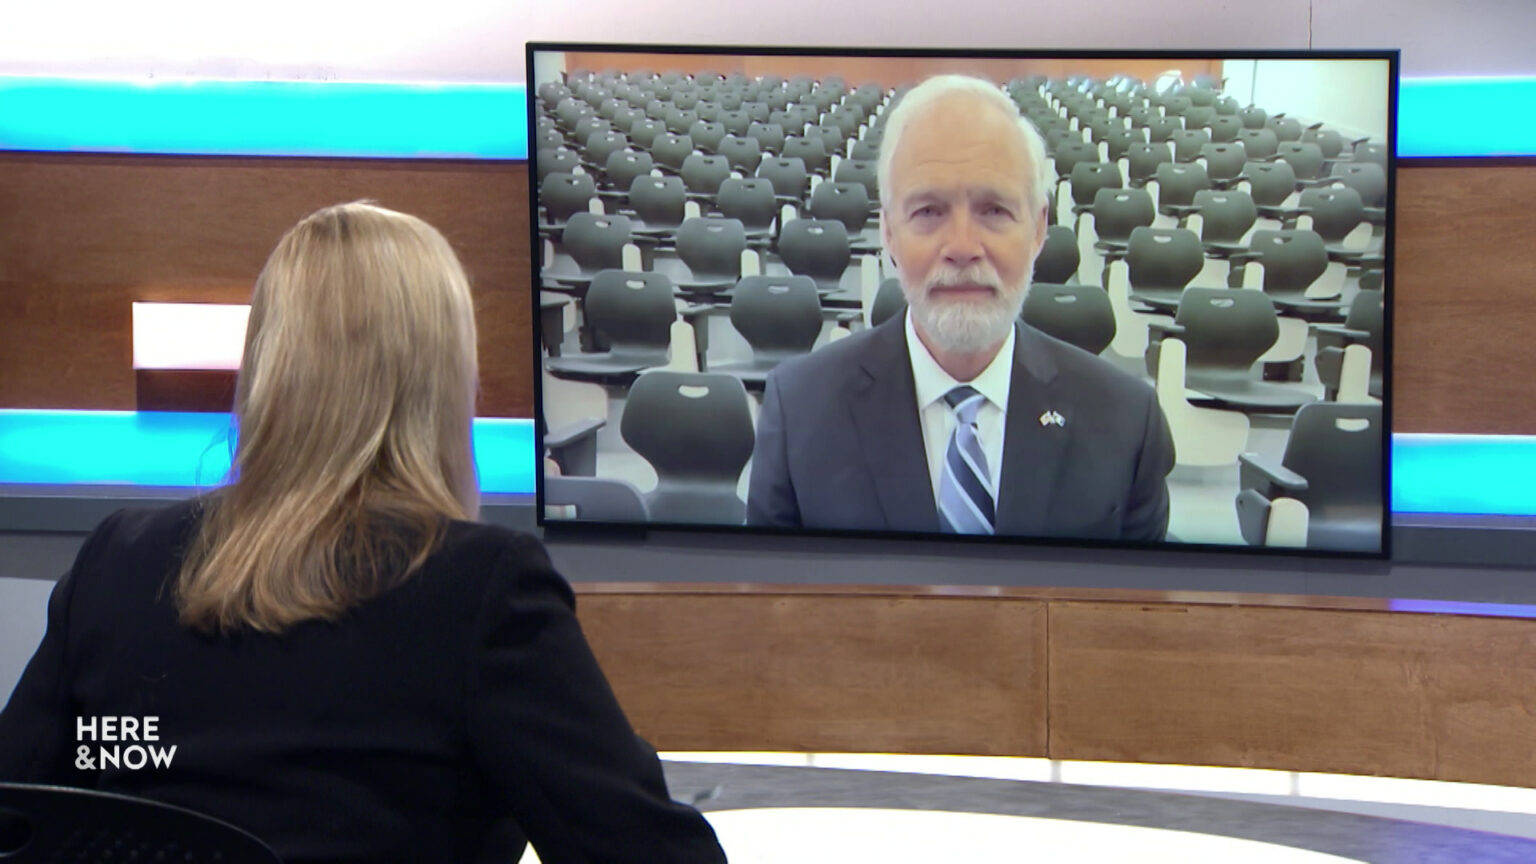 Frederica Freyberg sits at a desk on the Here & Now set and faces a video monitor showing an image of Ron Johnson.